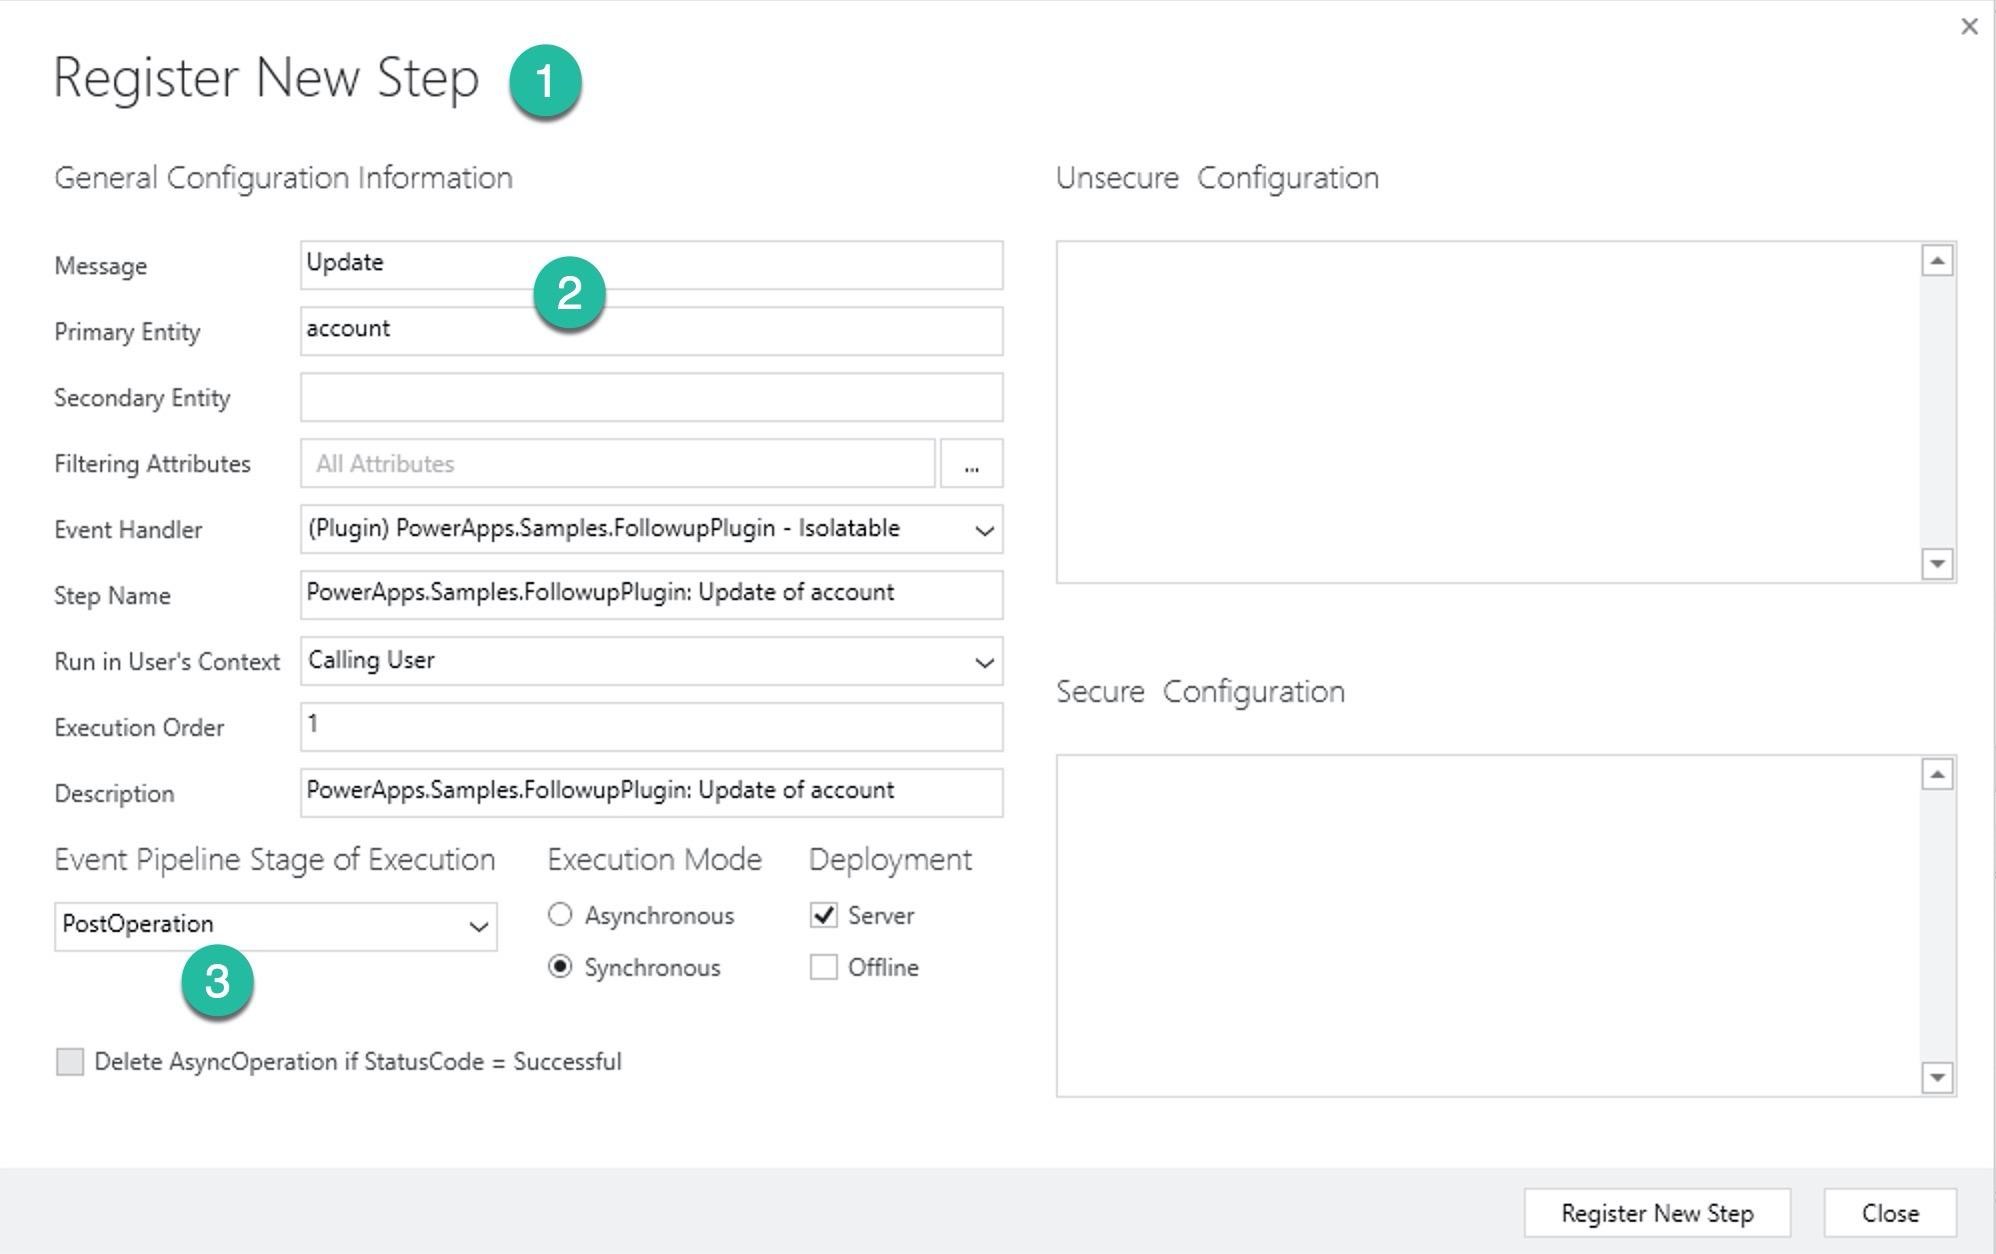 Register New Step @

General Configuration Information

Message Update ©
Primary Entity account

Secondary Entity

Filtering Attributes All Attributes

Event Handler (Plugin) PowerApps.Samples.FollowupPlugin - lsolatable
Step Name PowerApps.Samples.FollowupPlugin: Update of account
Run in User's Context Calling User

Execution Order 1

Description PowerApps.Samples.FollowupPlugin: Update of account

Event Pipeline Stage of Execution Execution Mode Deployment

PostOperation i © Asynchronous [¥] Server

© @ Synchronous [| Offline

|_| Delete AsyncOperation if StatusCode = Successful

v

Unsecure Configuration

Secure Configuration

Register New Step

Close